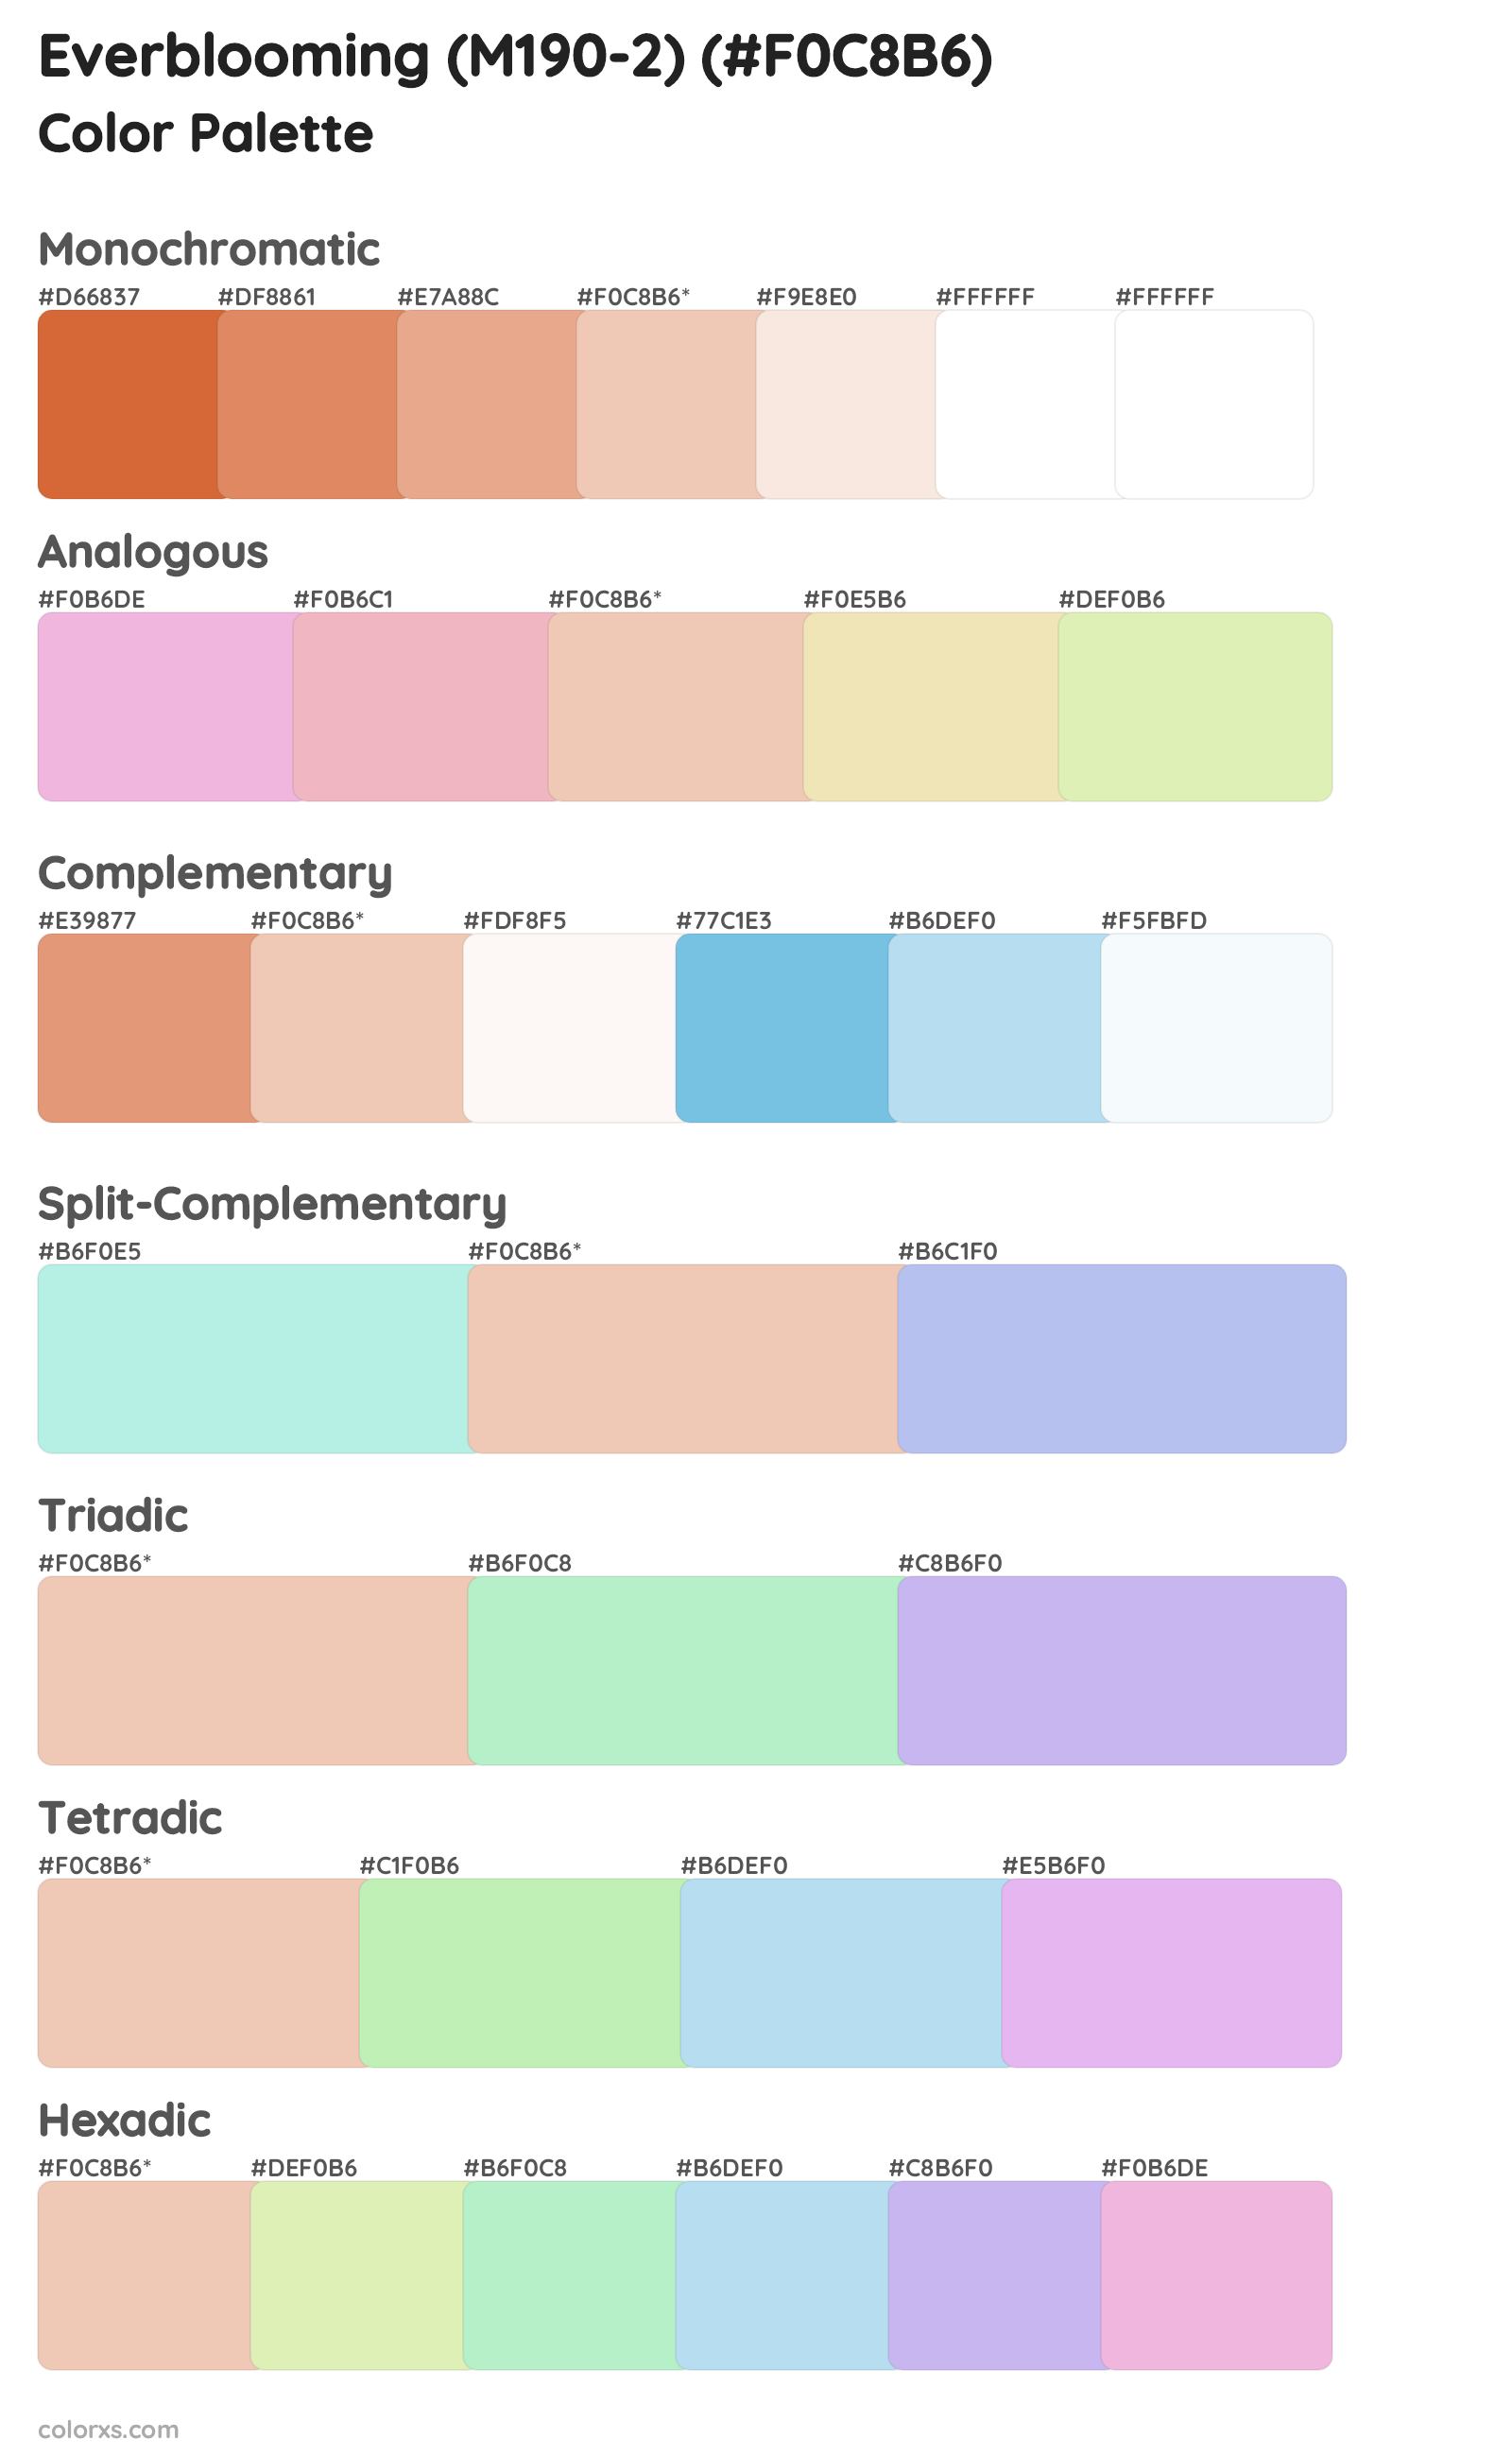 Everblooming (M190-2) Color Scheme Palettes